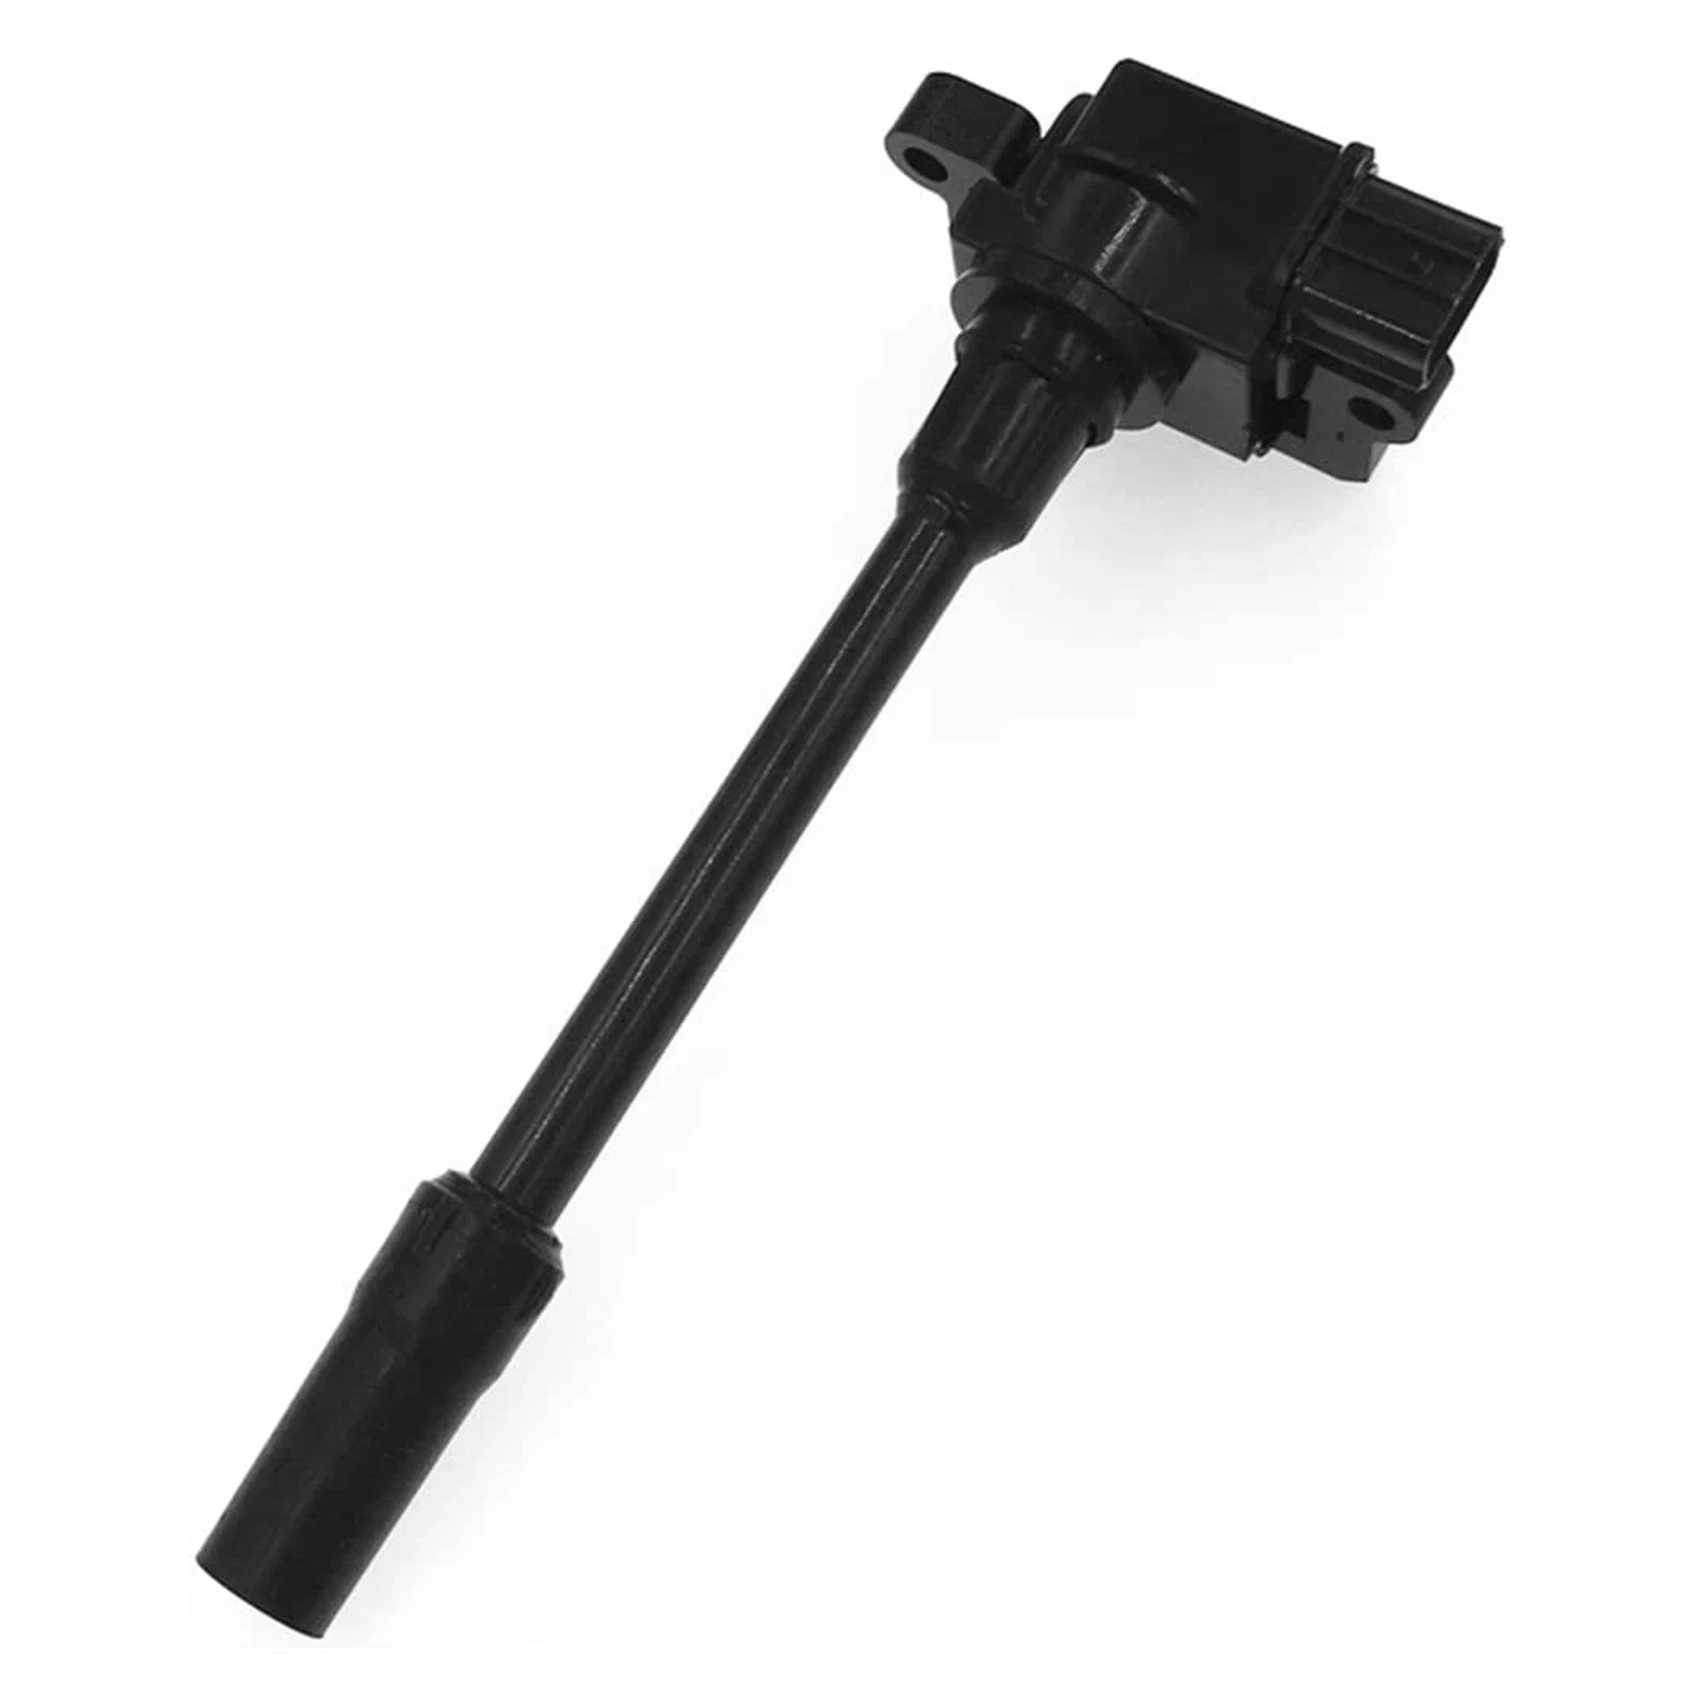 

H6T12272A Ignition Coil for MITSUBISHI CHARIOT GRANDIS 97-2003 GALANT VI SPACE RUNNER WAGON 2.4 98-04 MD355008